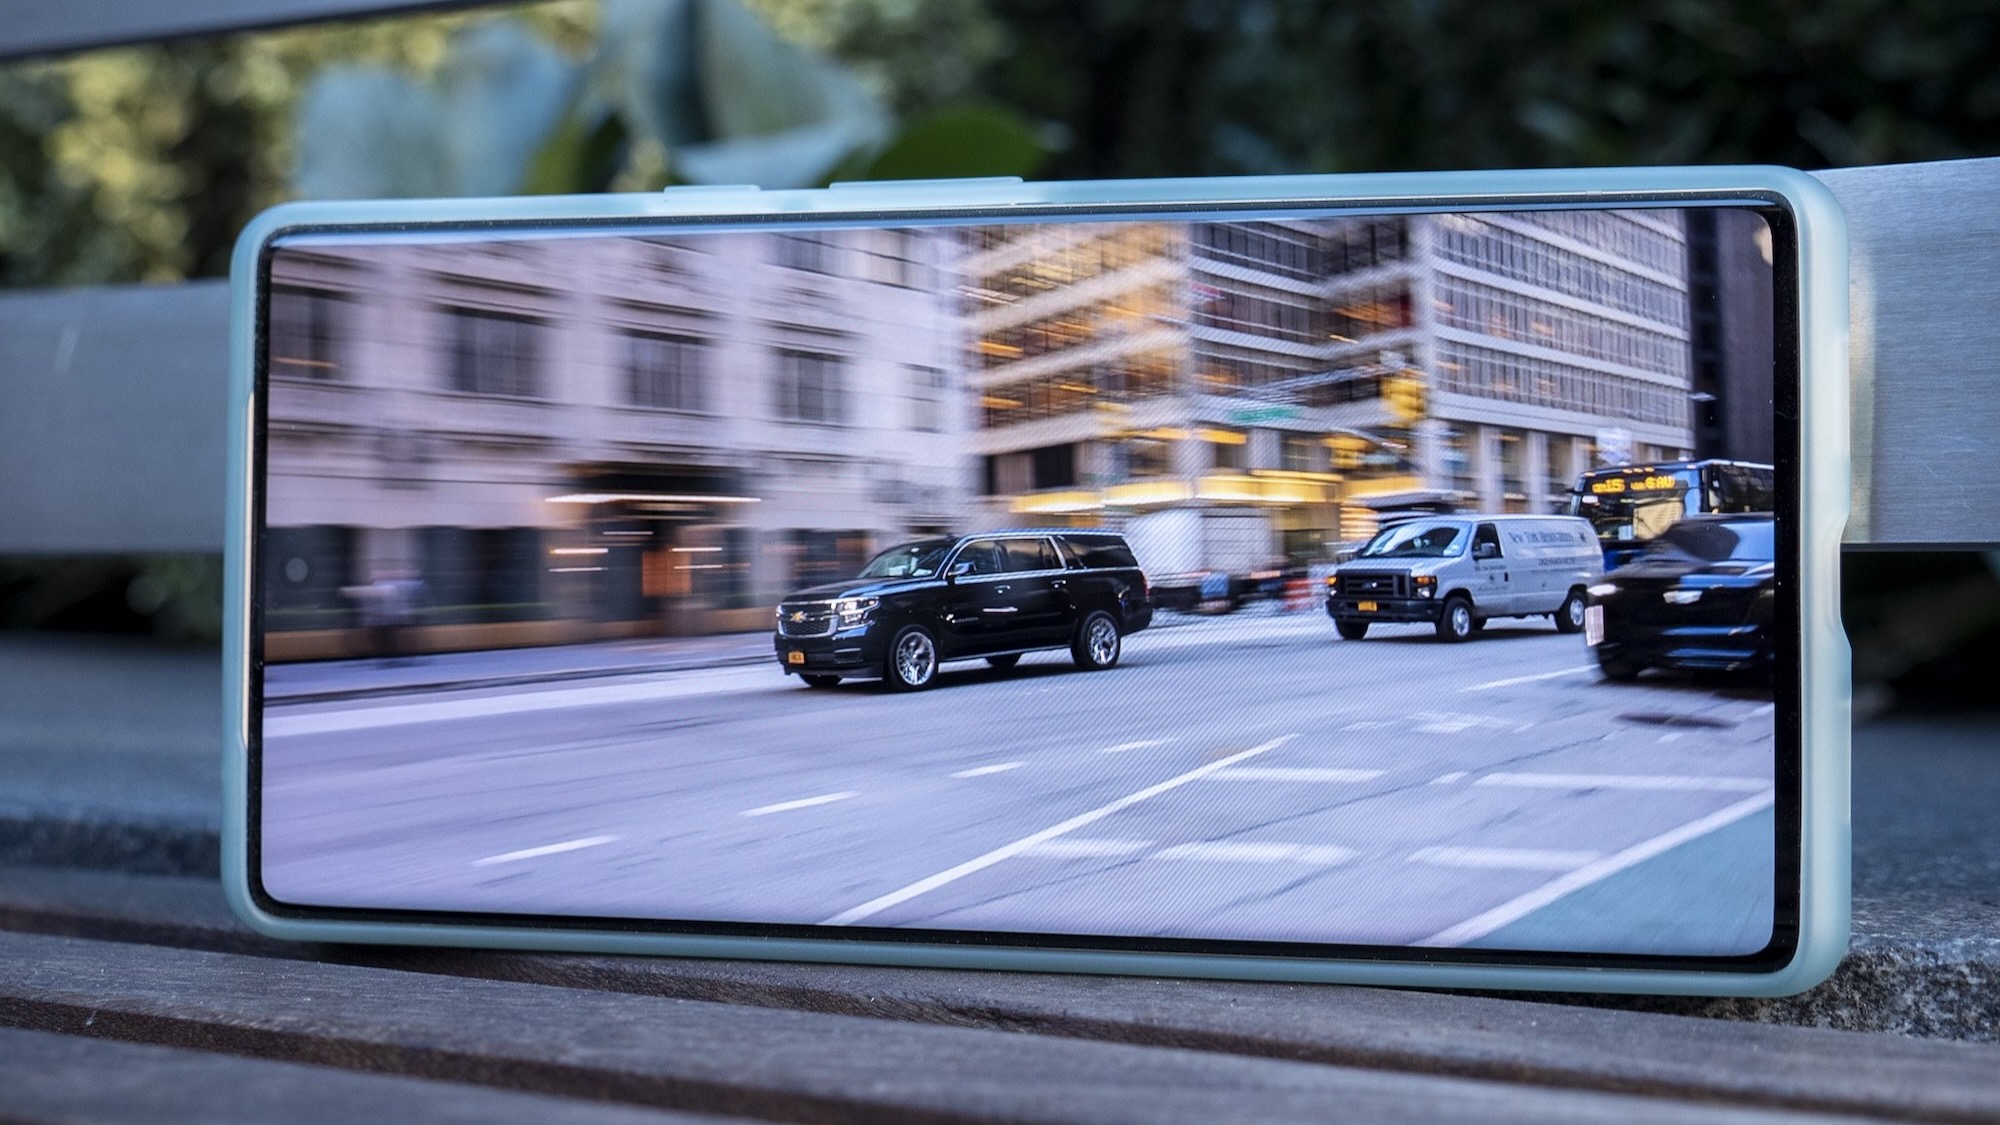 Pixel 6 Pro showing clear photo of moving cars